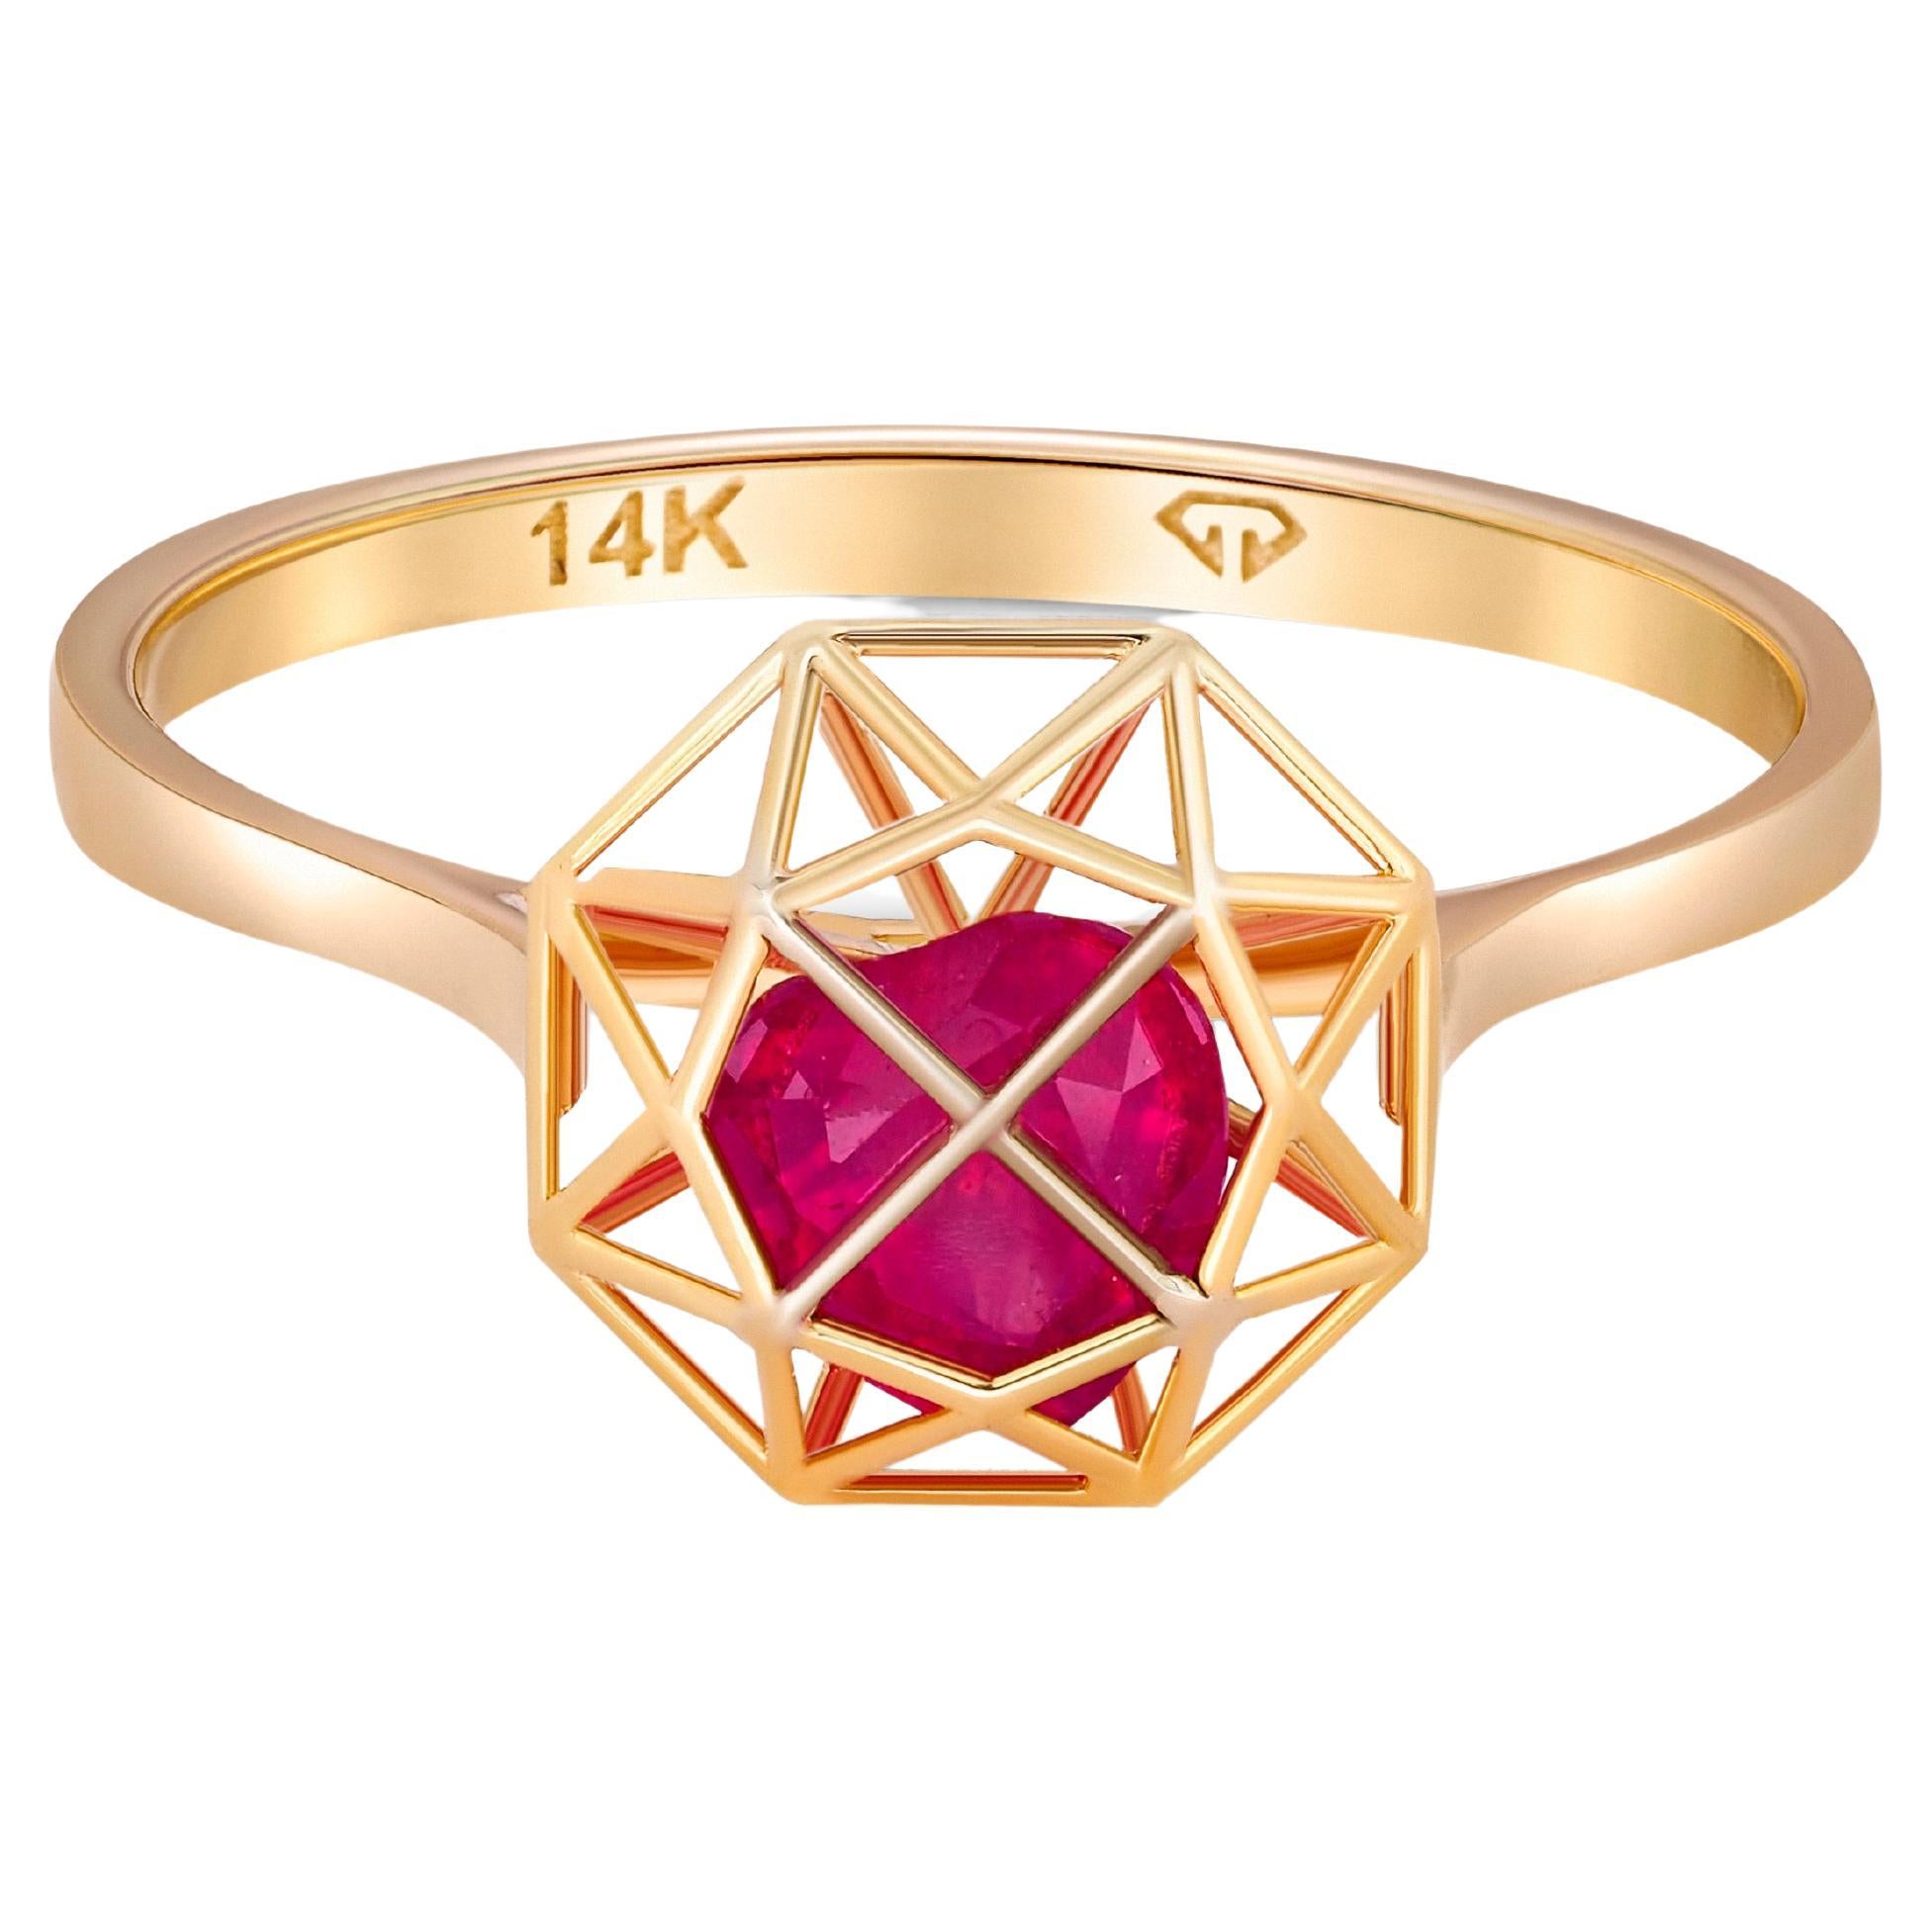 14 karat Gold Ring with Heart Ruby. July birthstone ruby ring. Love ring